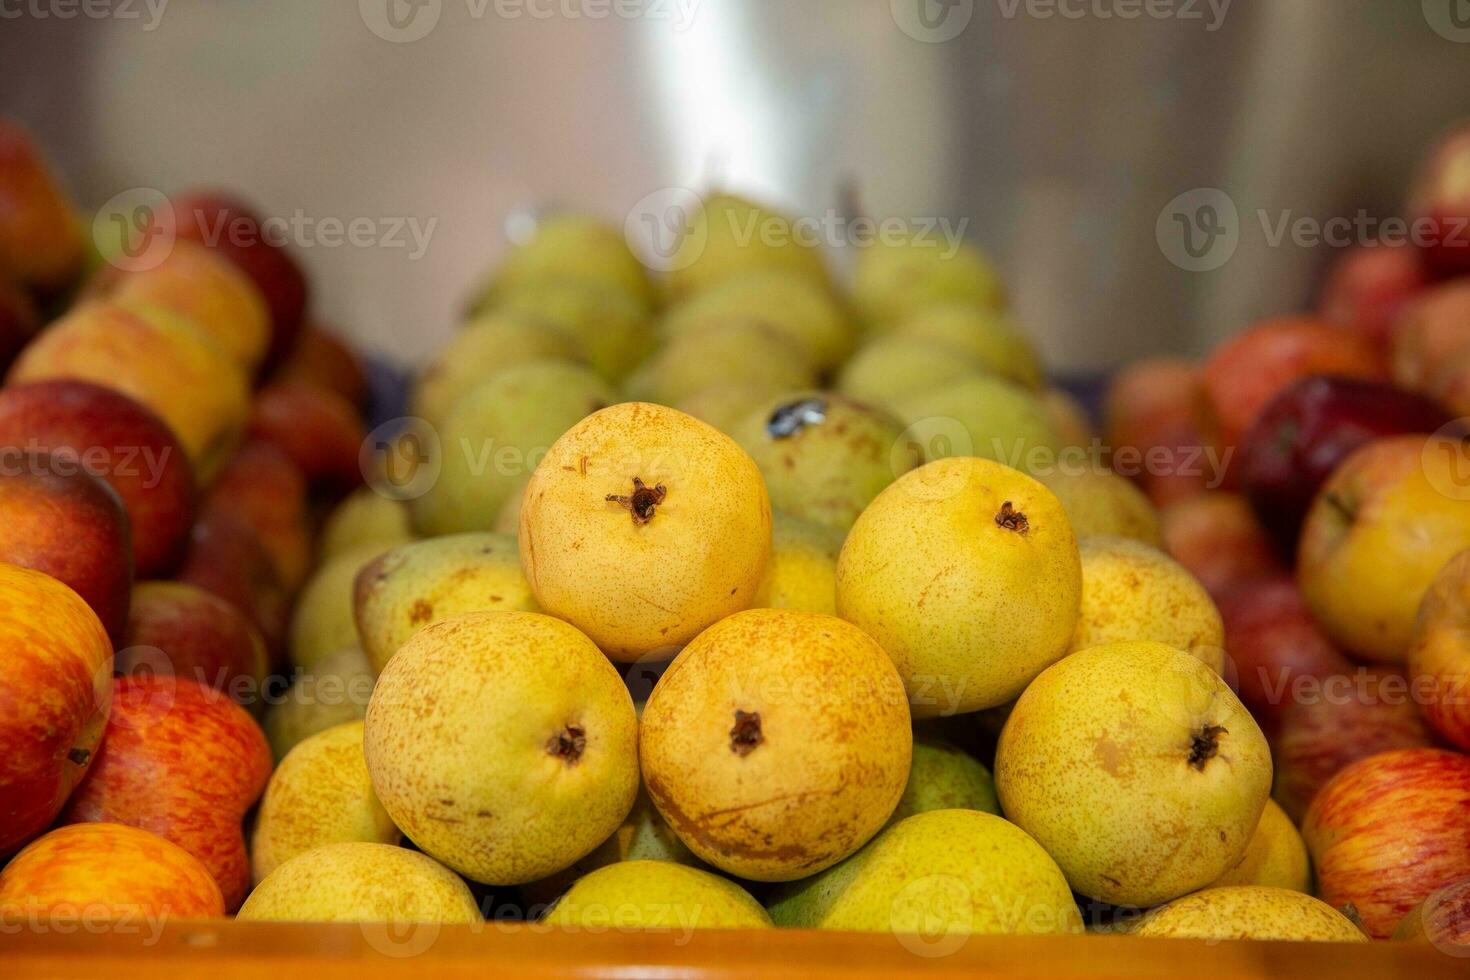 Pears and apples for sale at a market in Barcelona, Spain photo